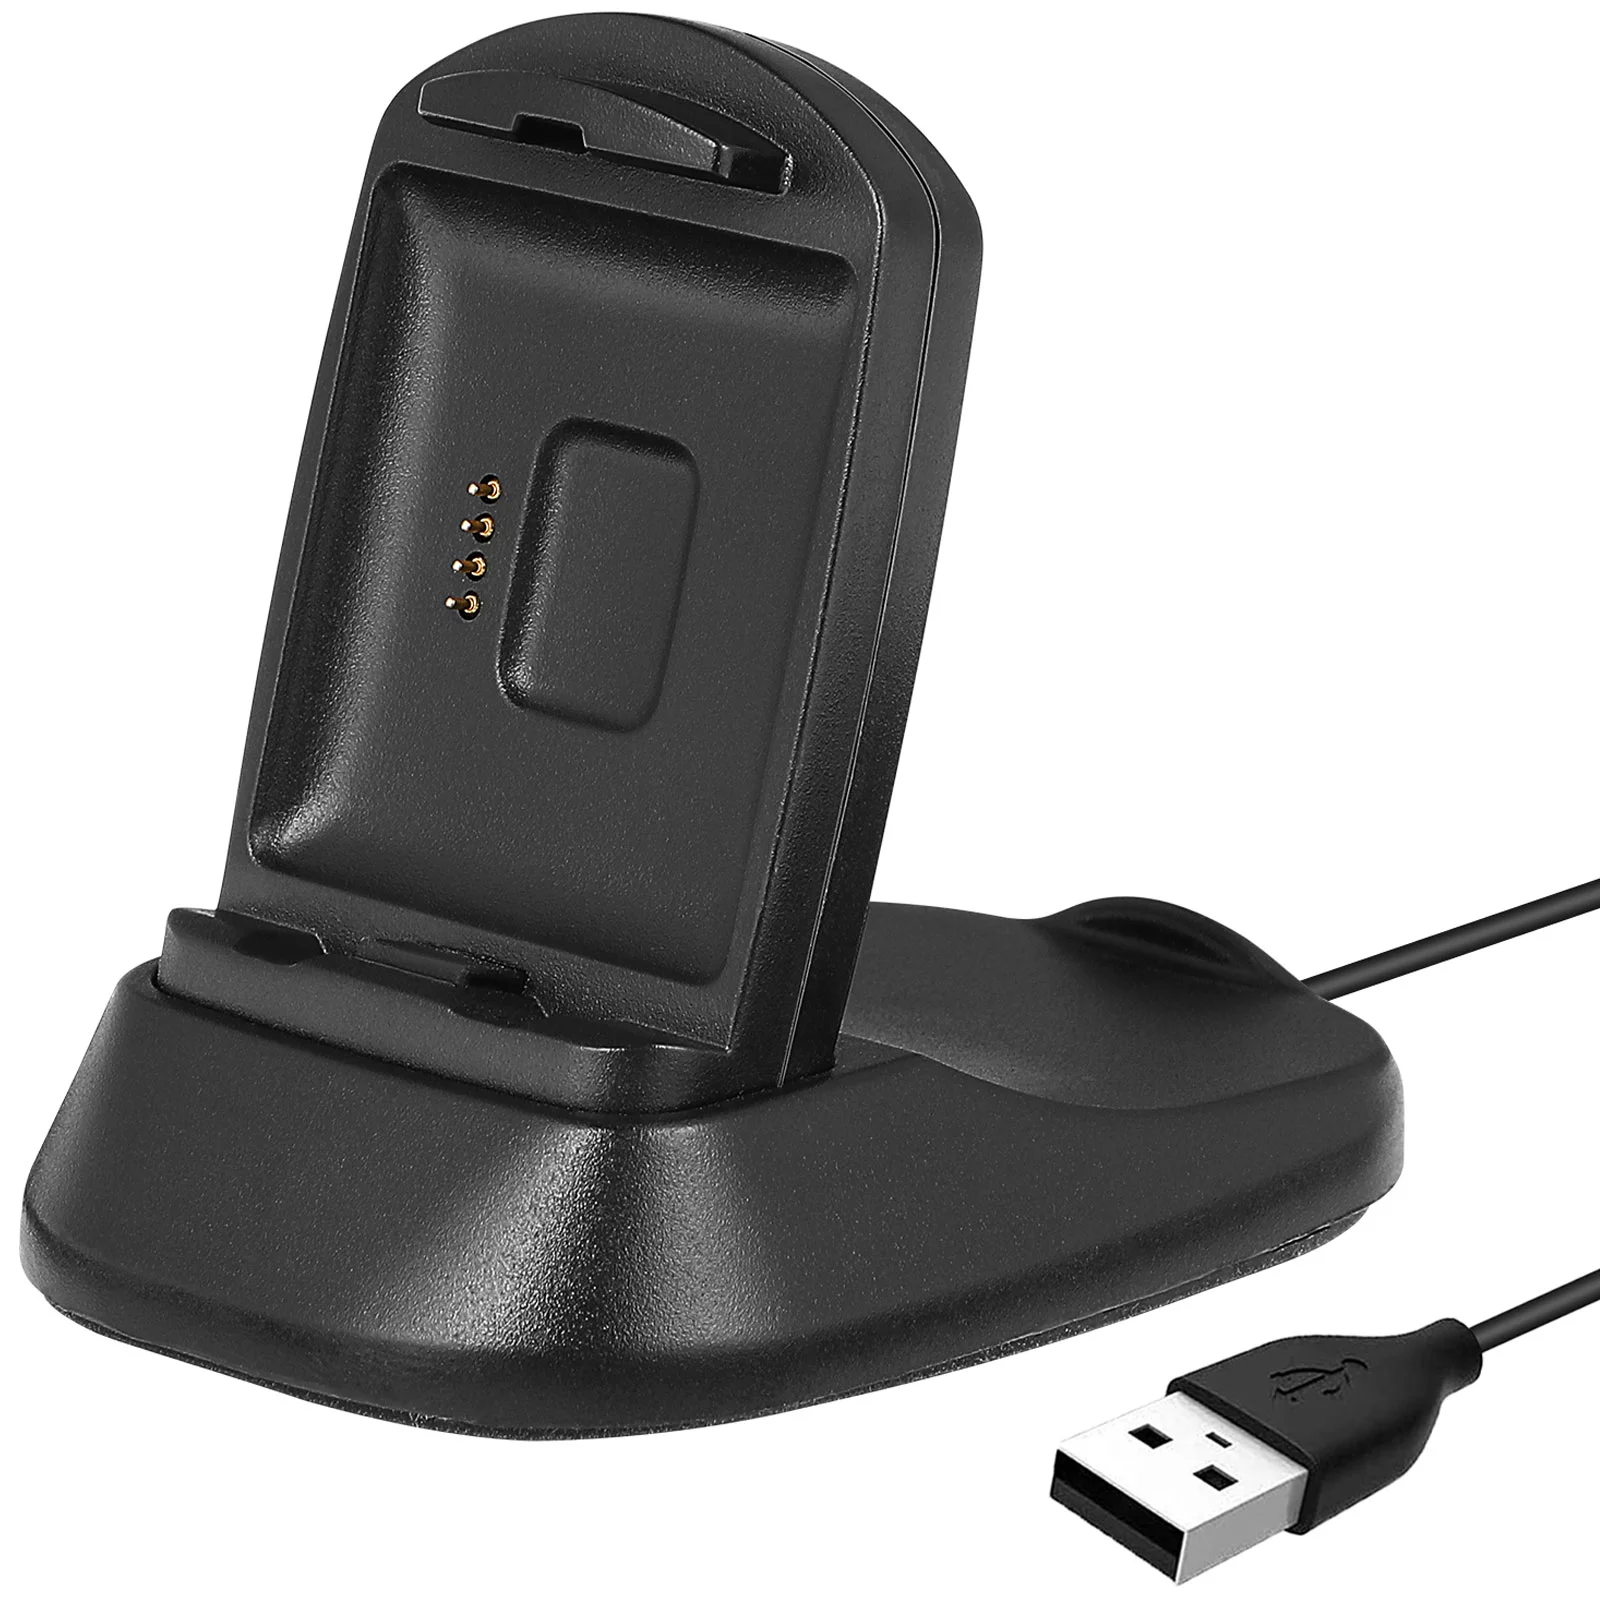 

Charging Dock Stand Station Base Cradle with USB Cord Compatible for Fitbit Blaze Series Smart Watch